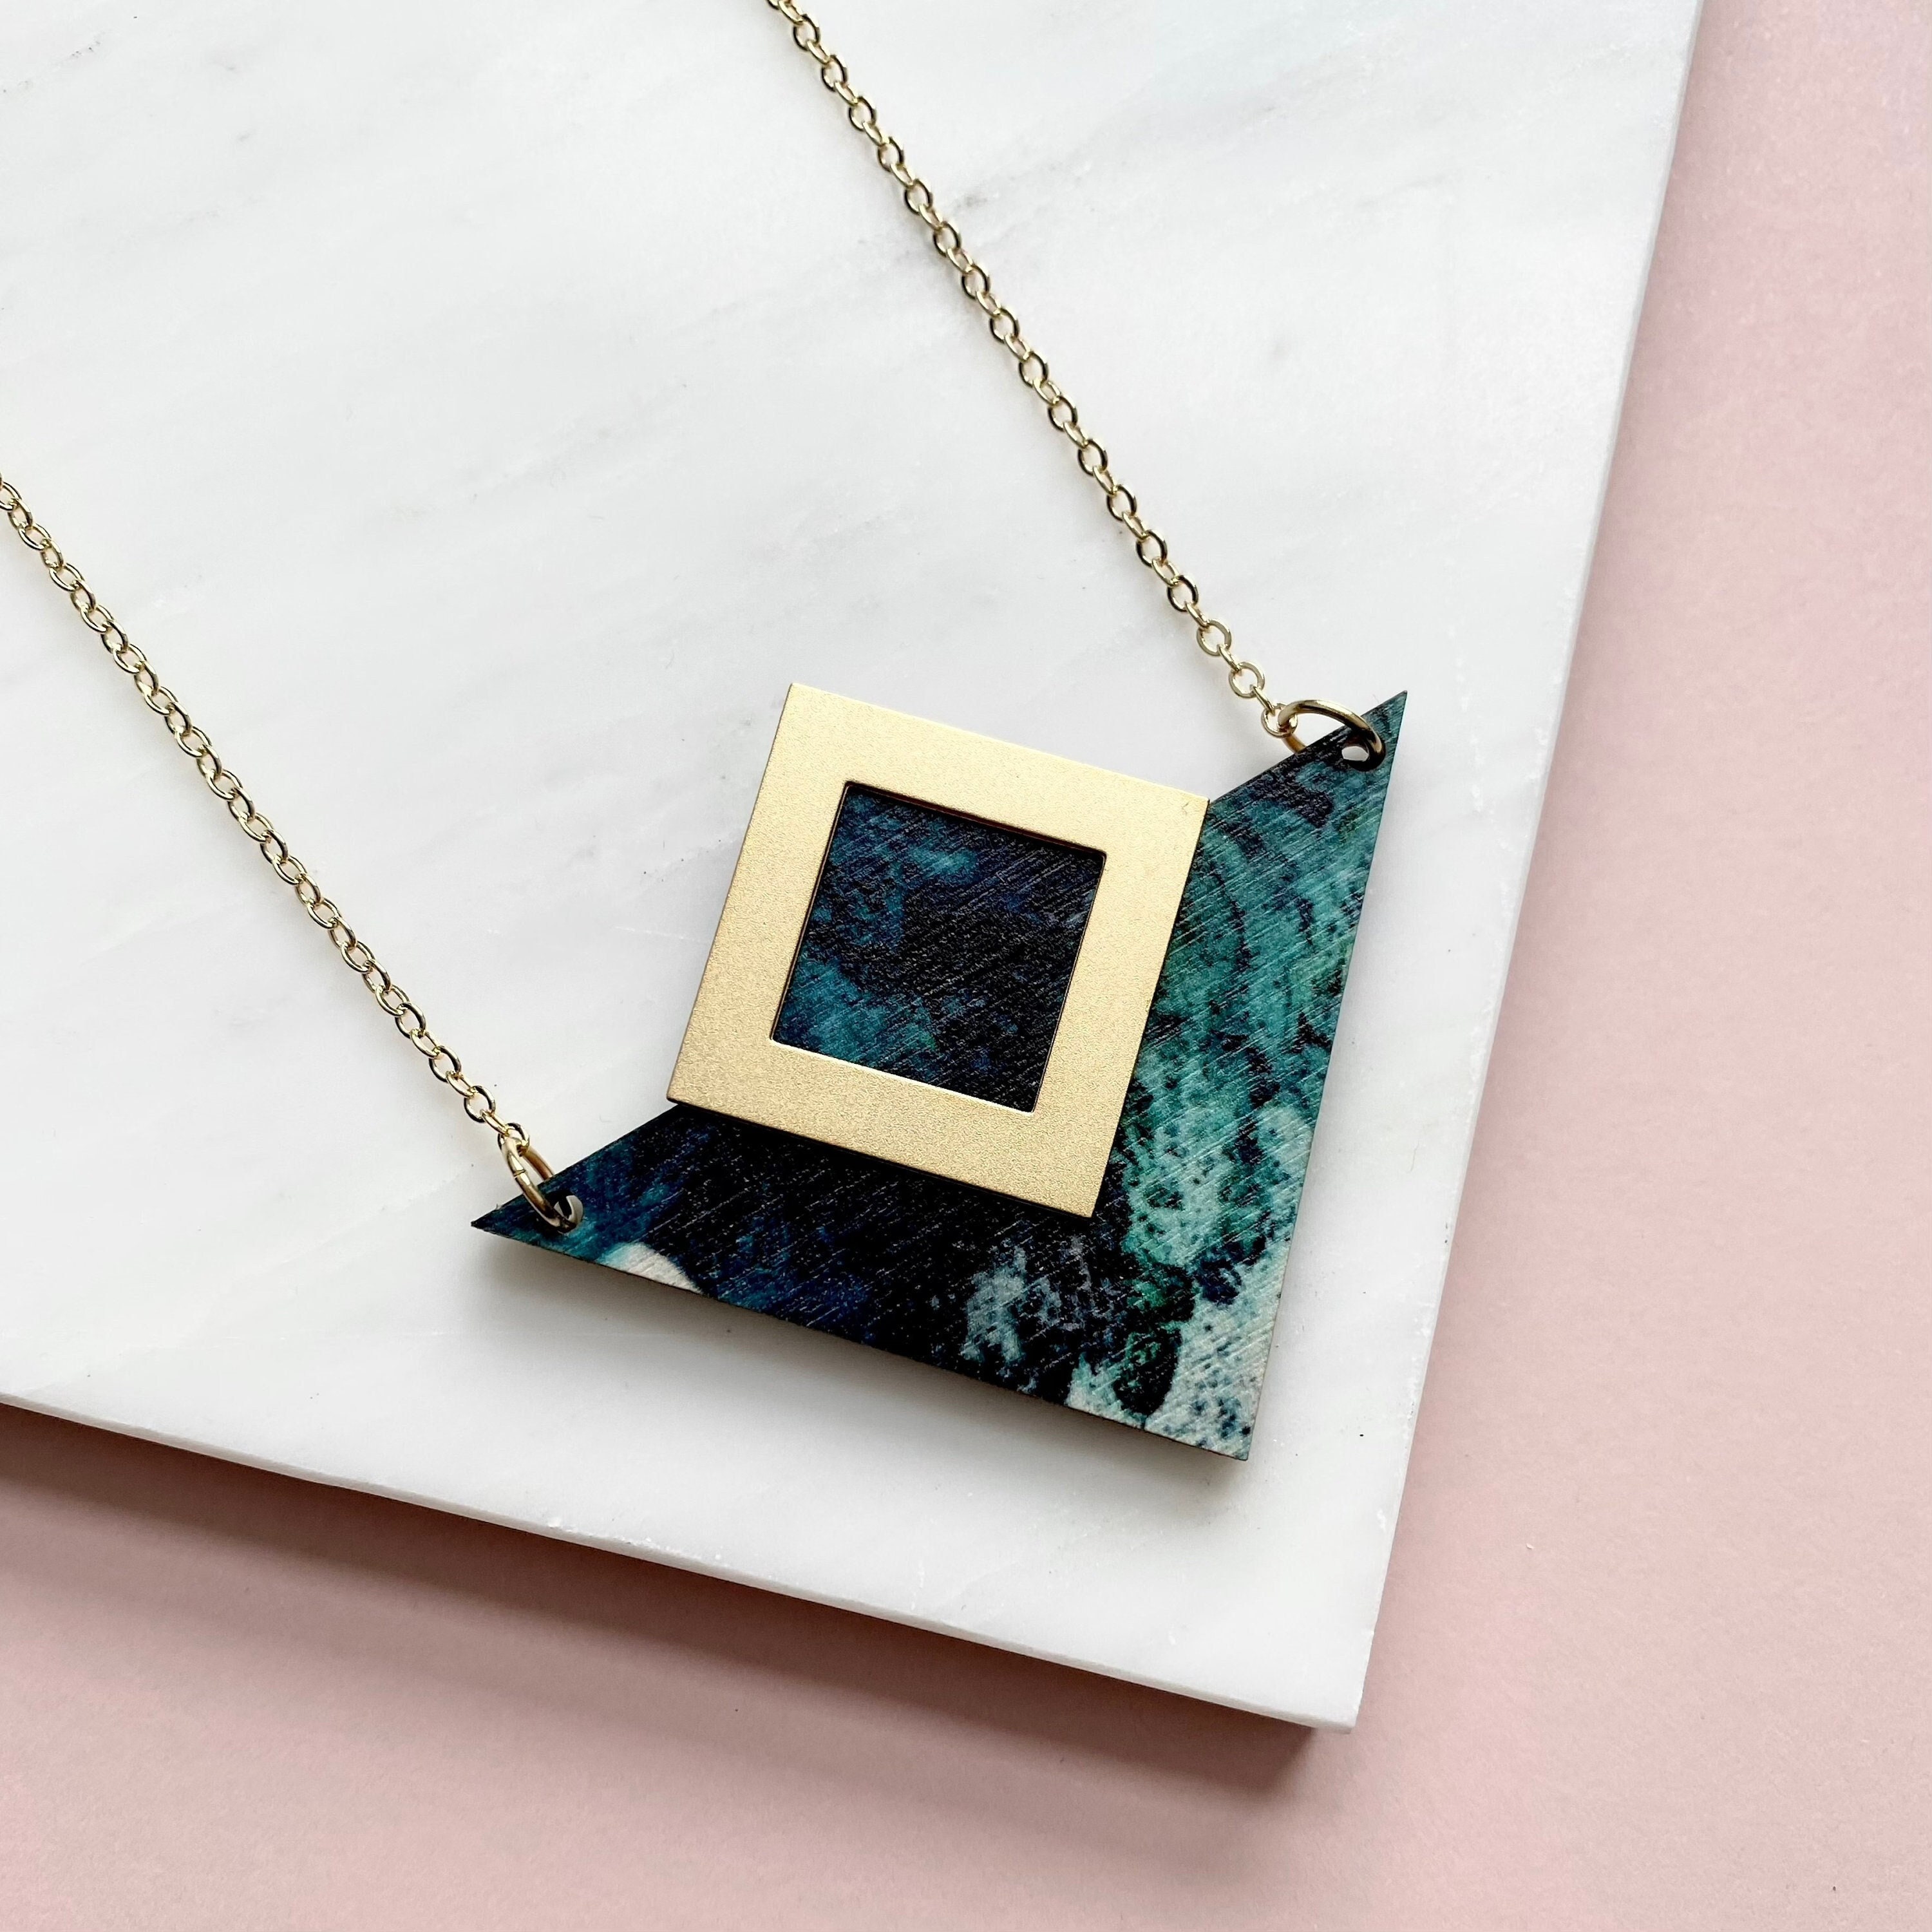 Teal & Gold Triangle Necklace - Geometric Statement Pendant Modern Jewellery Gift For Her